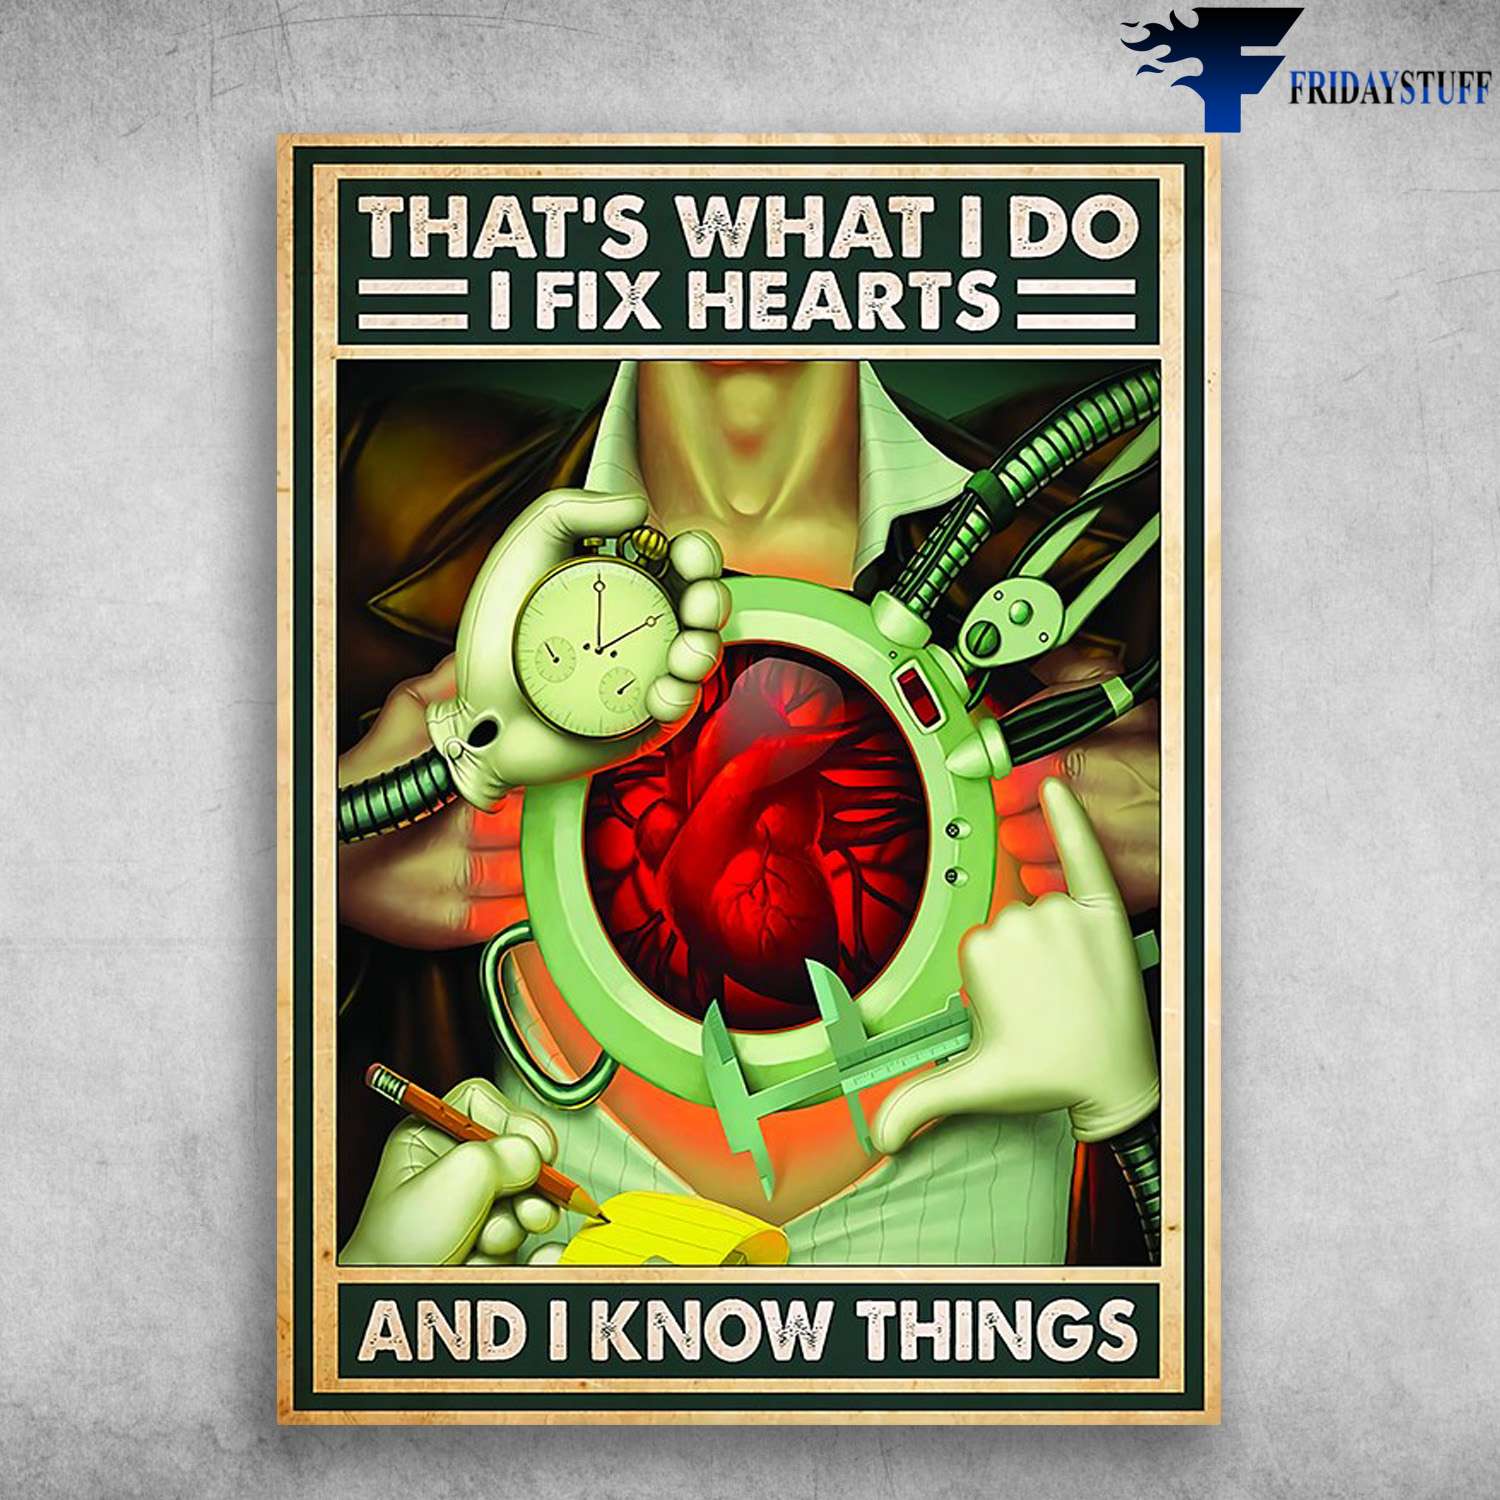 Heart Fixing, Surgeon Poster - That's What I Do, I Fix Hearts, And I Know Things